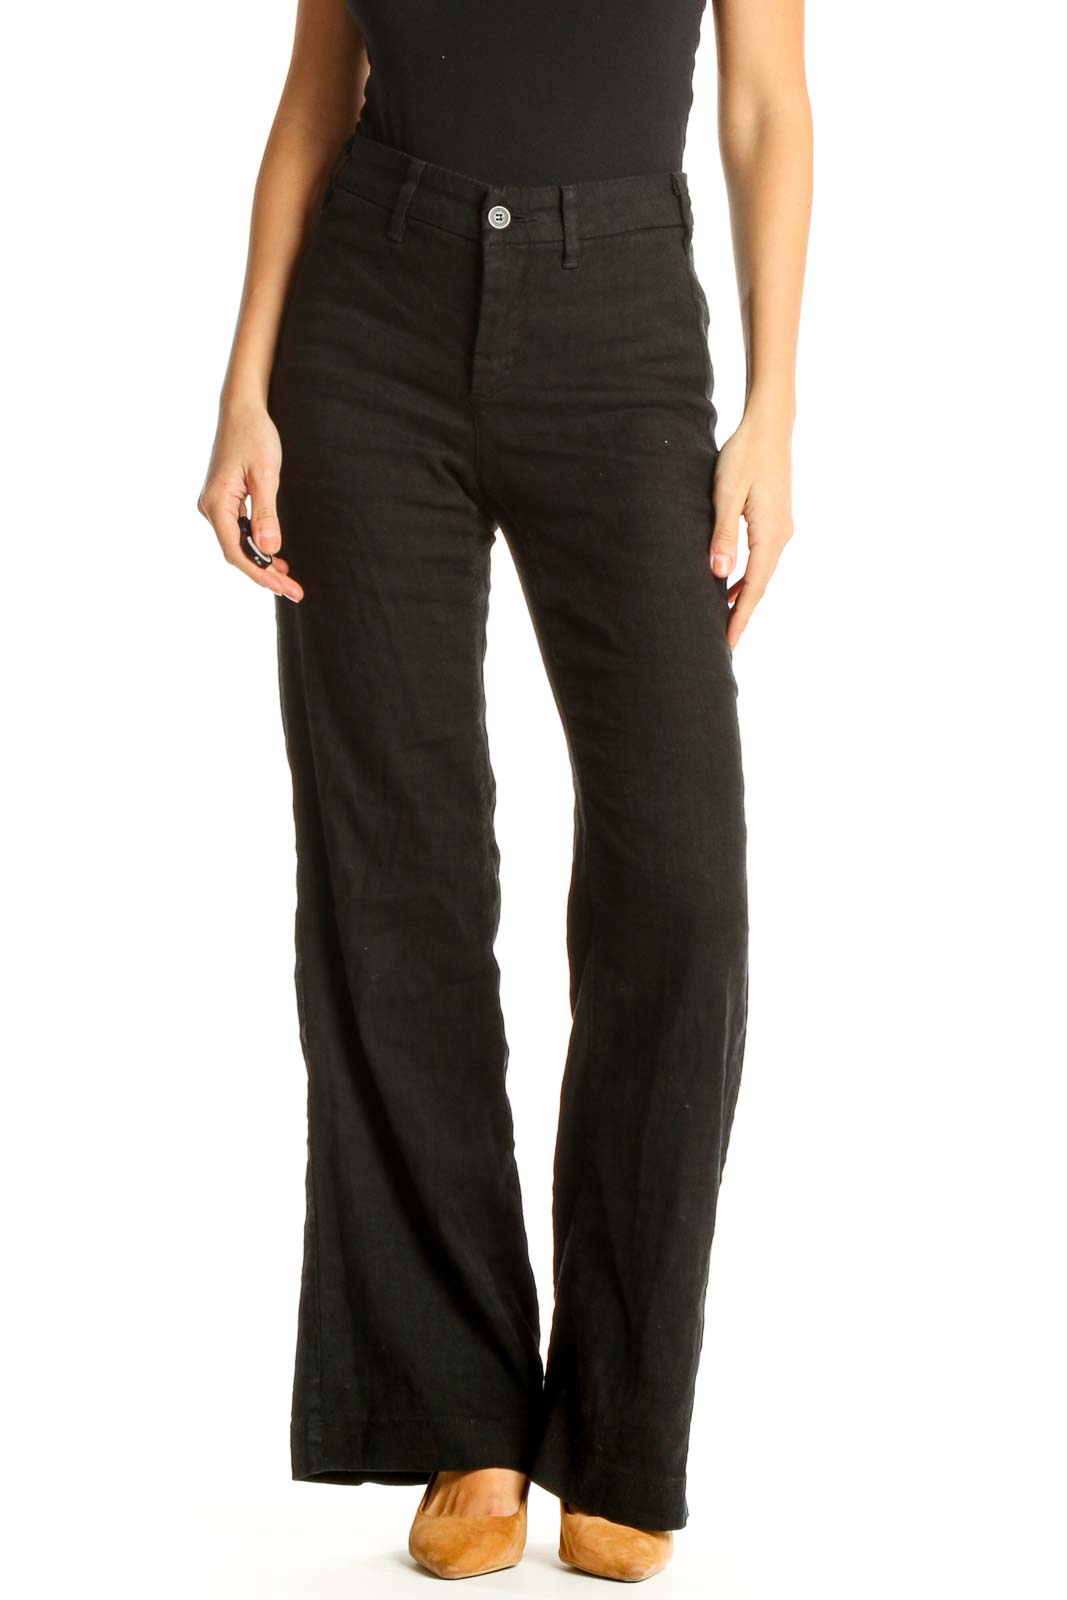 Black Solid All Day Wear Wide Leg Pants Front